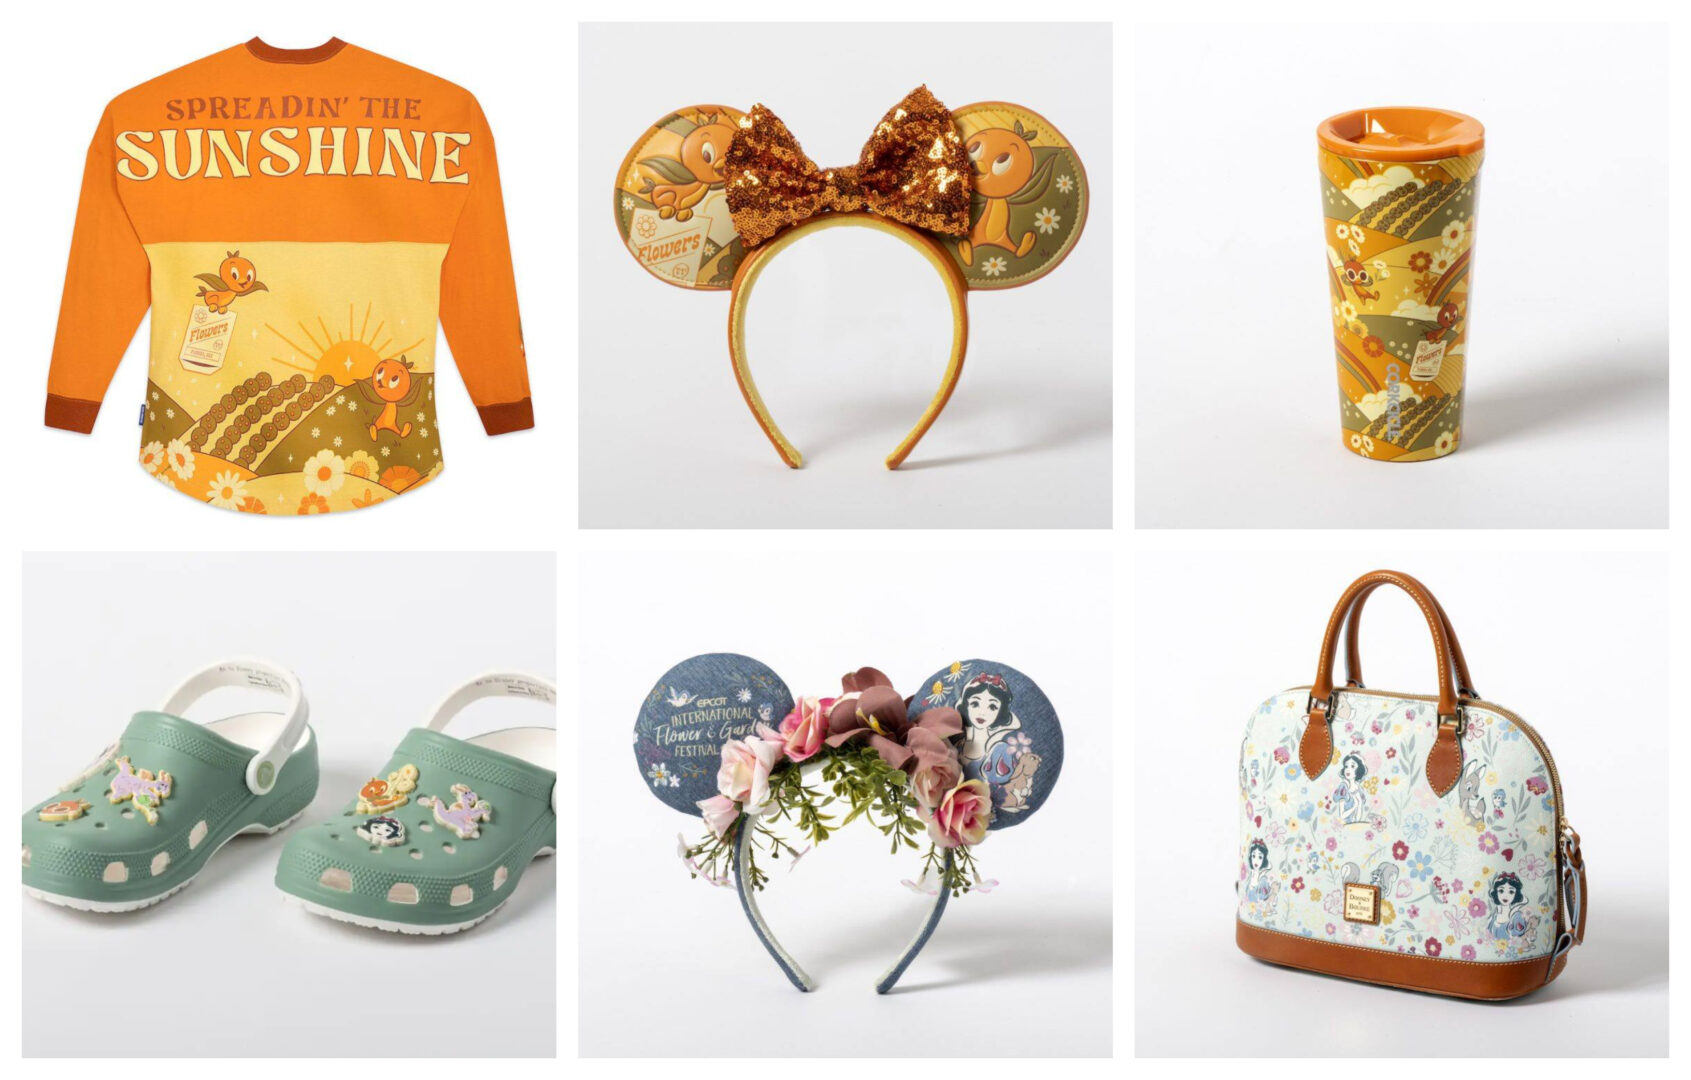 First Look at the Merchandise for the 2023 EPCOT International Flower & Garden Festival